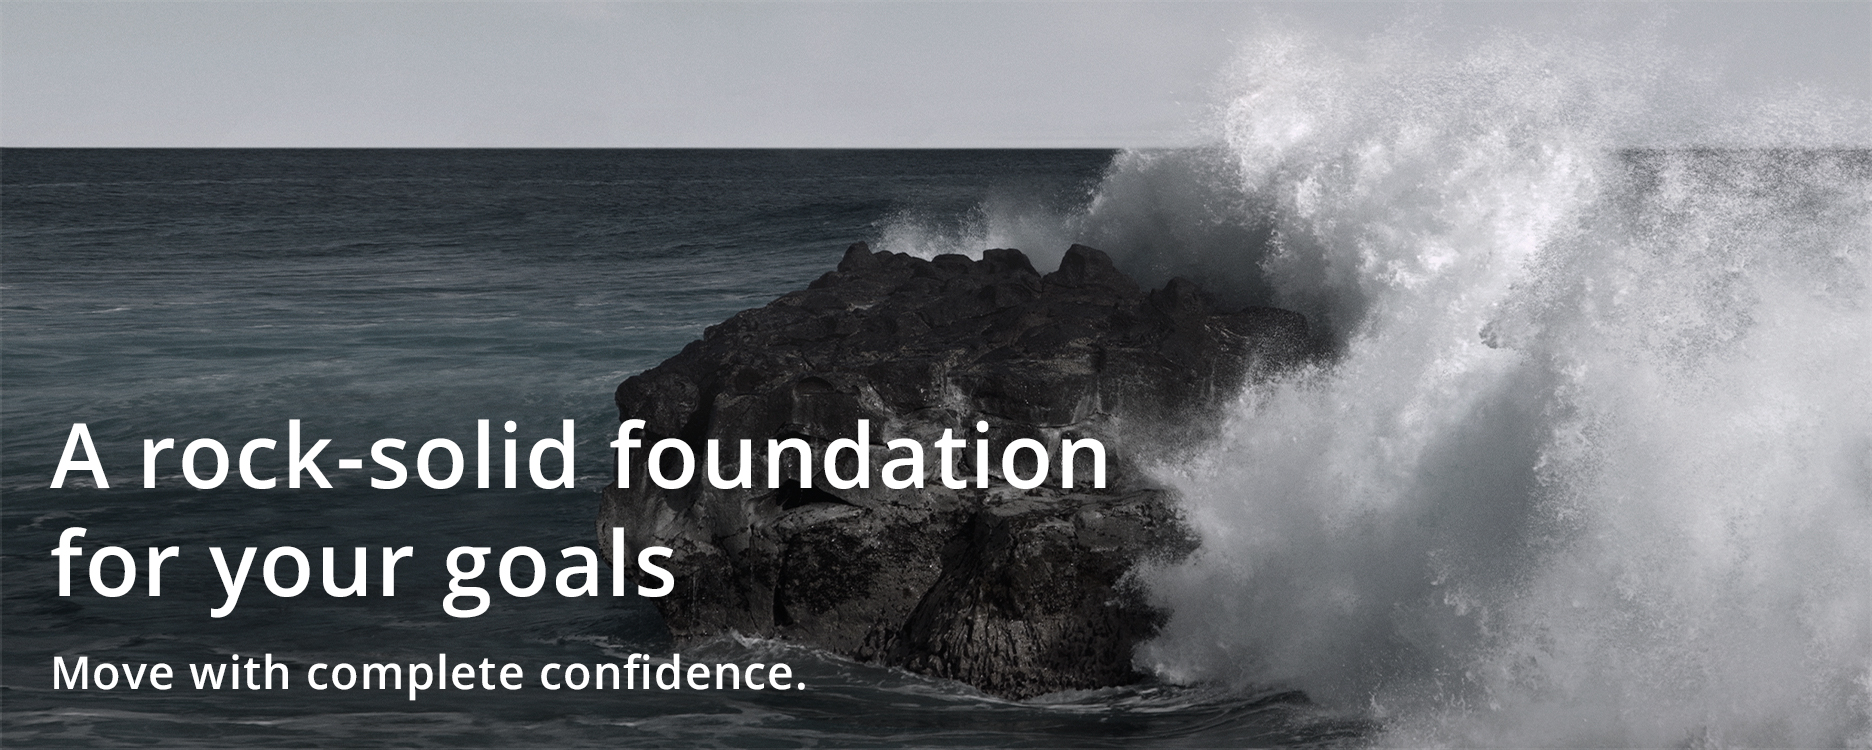 A rock-solid foundation for your goals